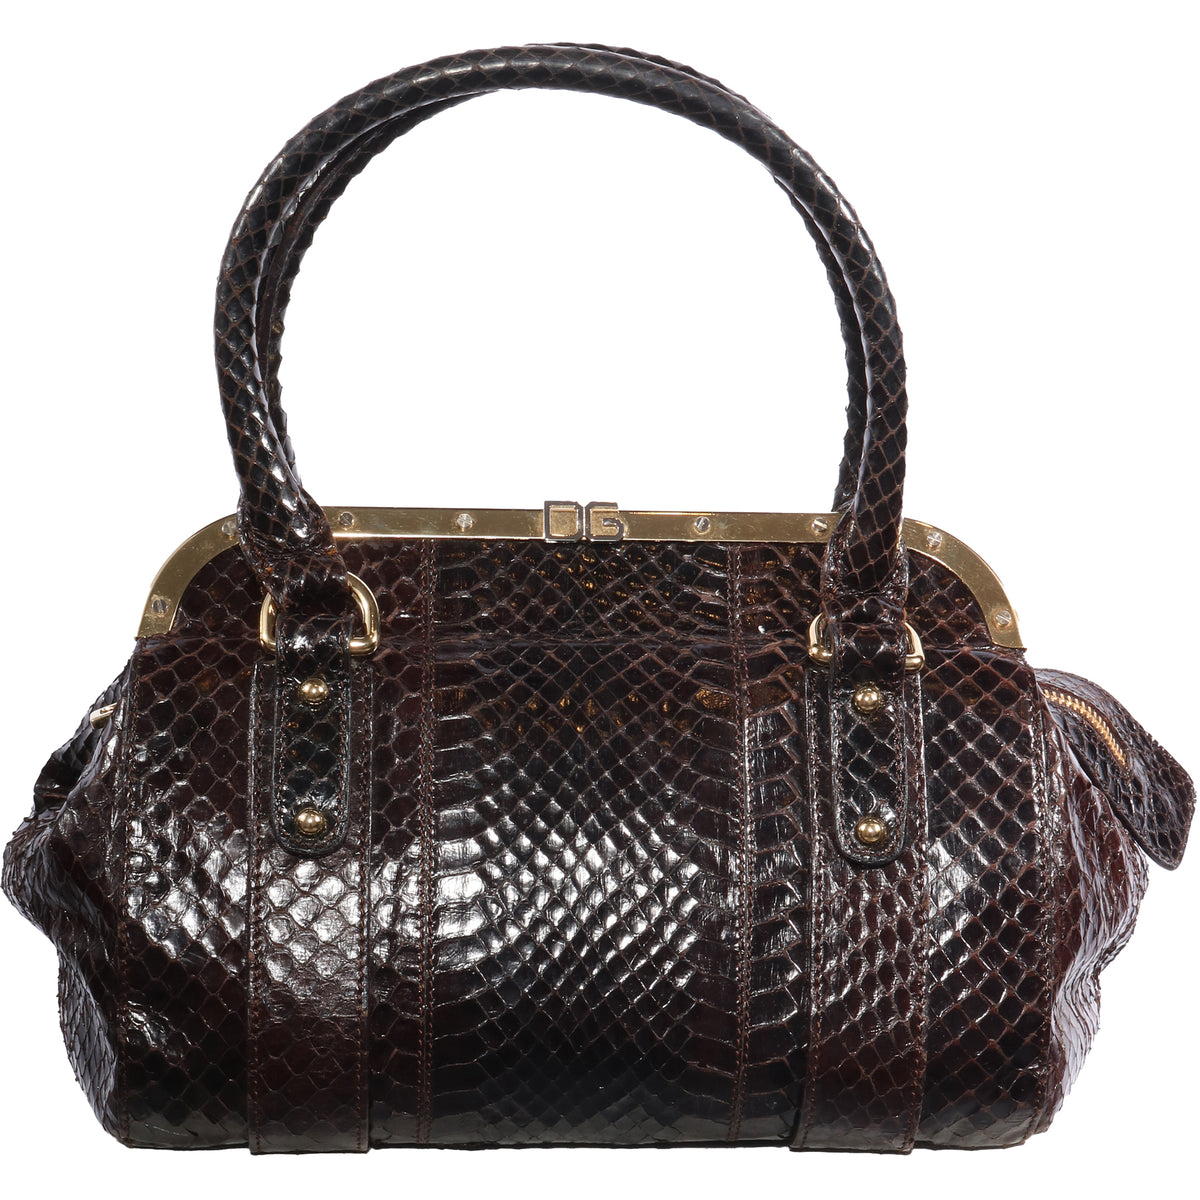 VTG DOLCE AND GABBANA EMBOSSED LEATHER TOP HANDLE BAG